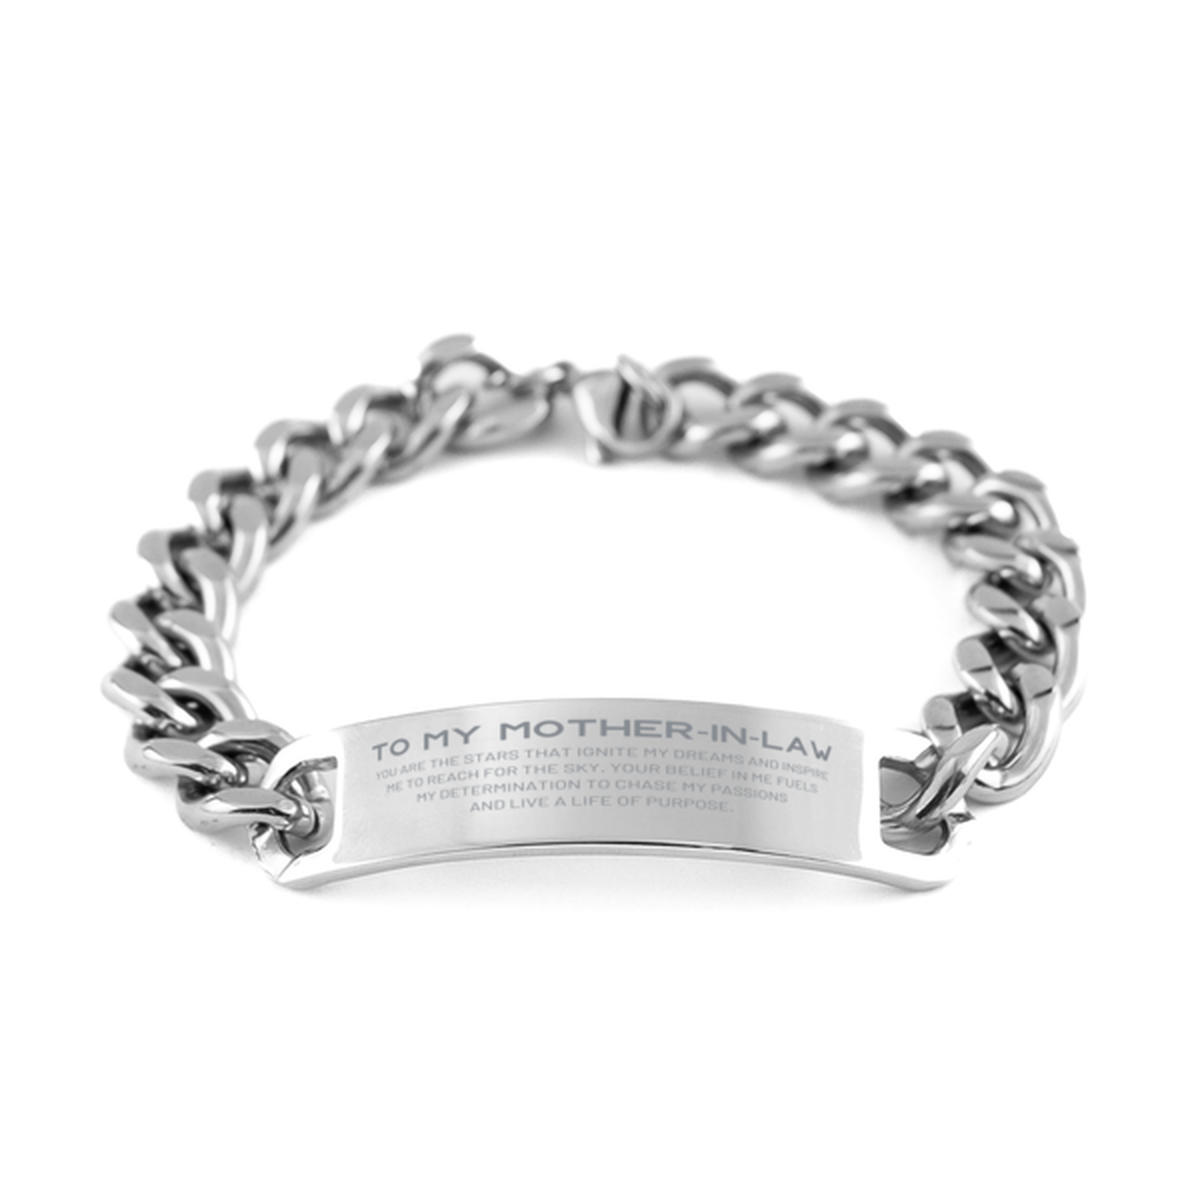 To My Mother-In-Law Cuban Chain Stainless Steel Bracelet, You are the stars that ignite my dreams and inspire me to reach for the sky, Birthday Unique Gifts For Mother-In-Law, Thank You Gifts For Mother-In-Law